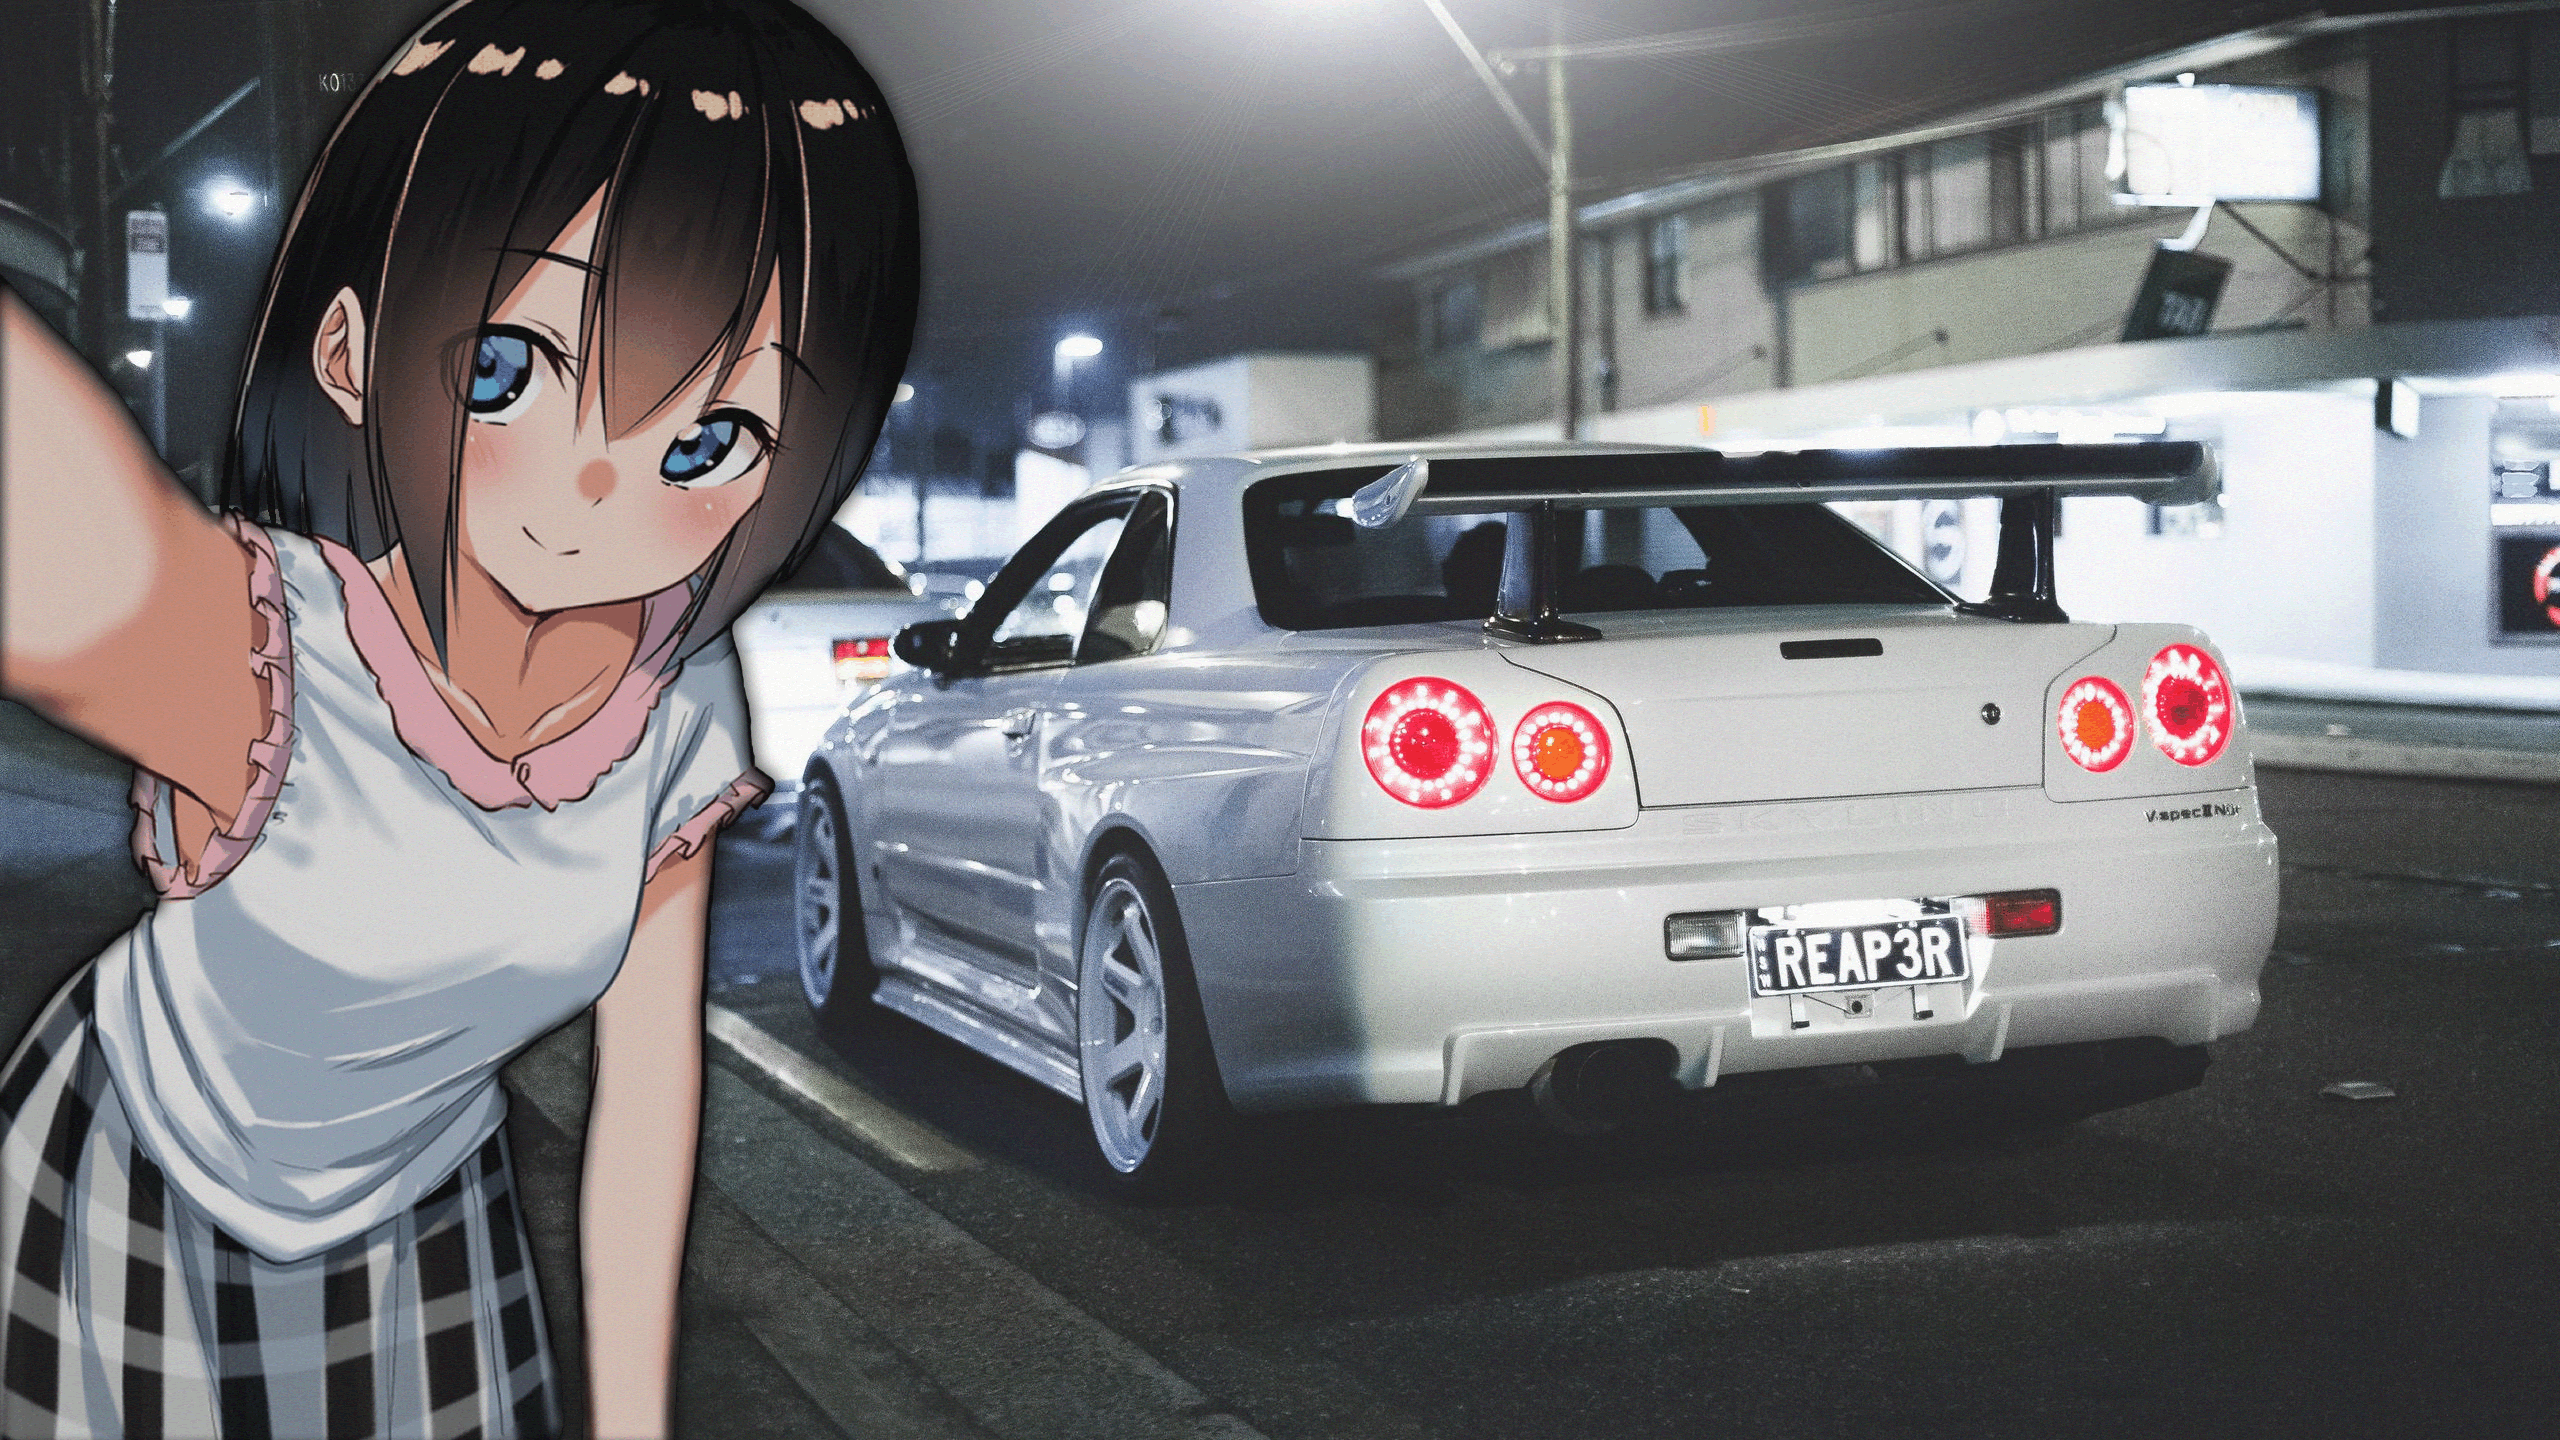 blue eyes, brunette, smiling, Japanese cars, anime girls, selfies, car,  picture-in-picture, vehicle, anime, white cars, animeirl | 2560x1440  Wallpaper - wallhaven.cc